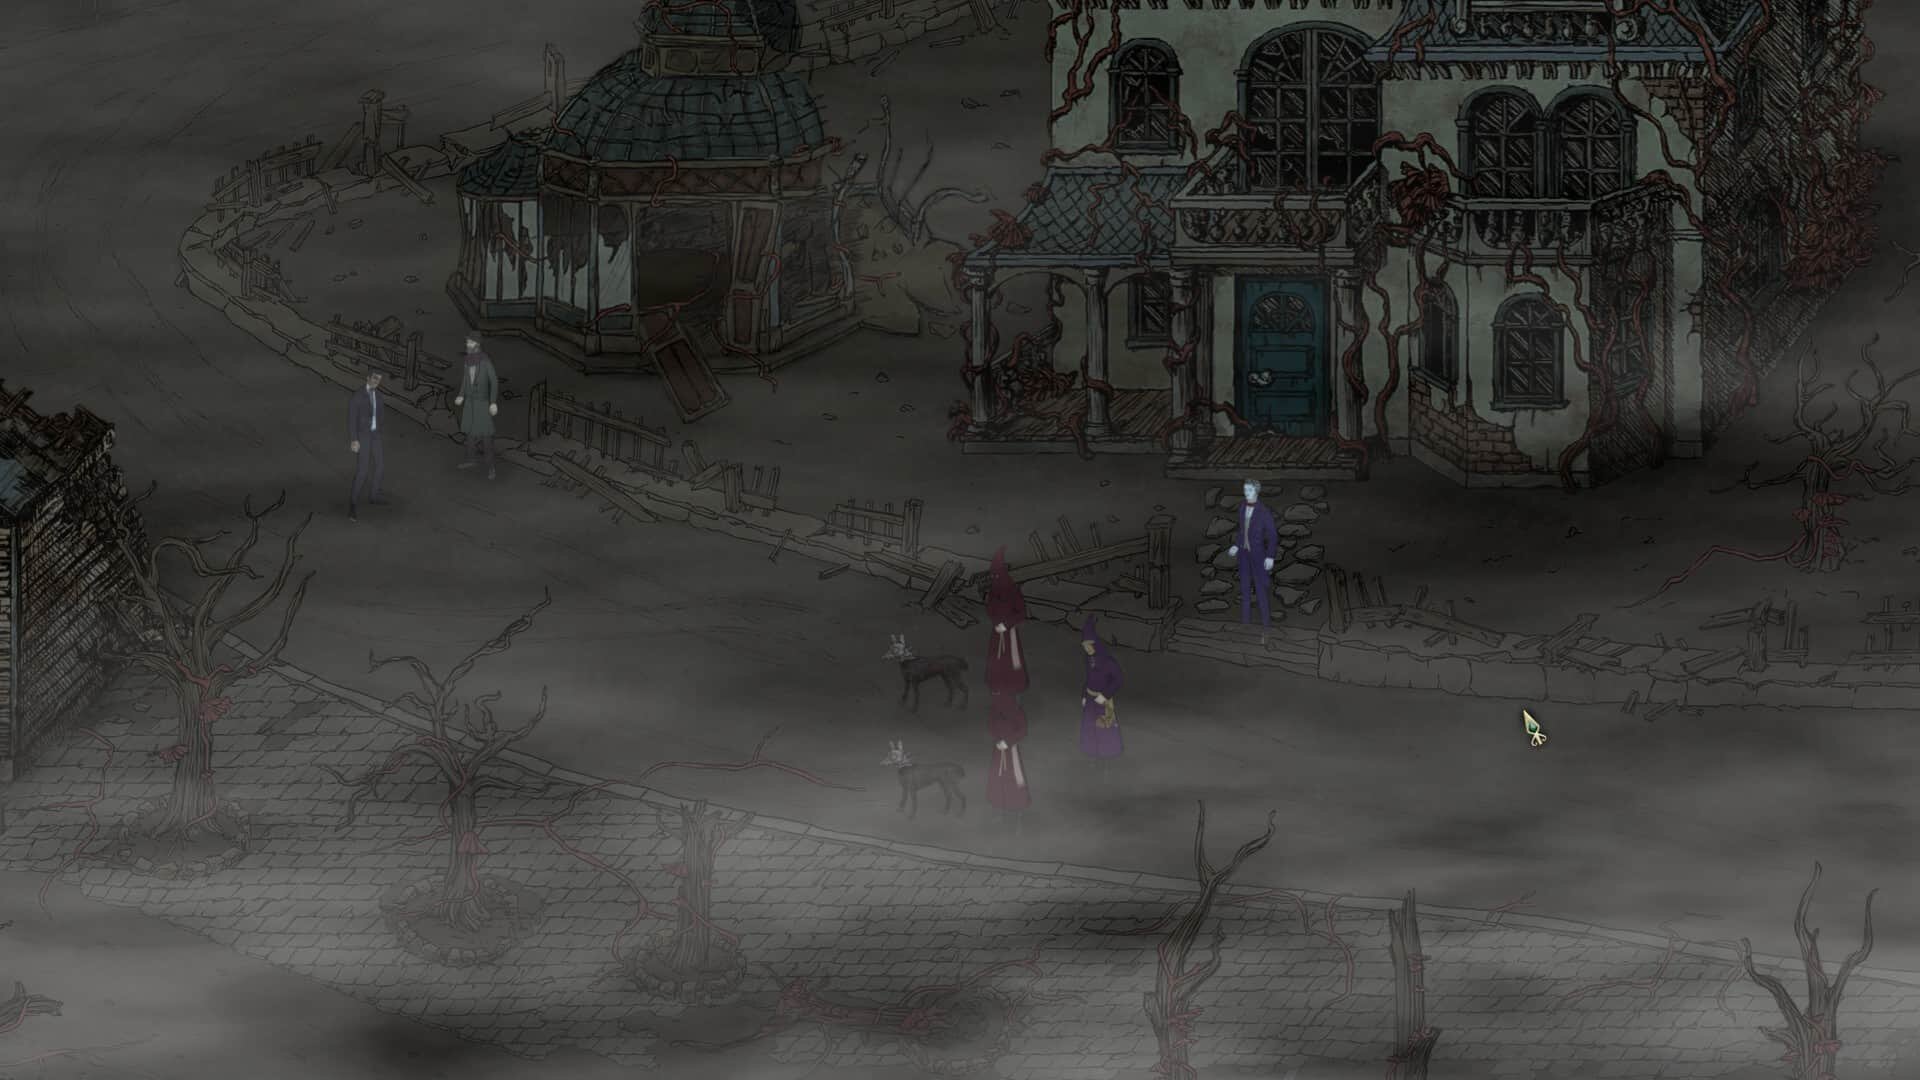 Stygian: Reign of the Old Ones game screenshot, Cthulhu cultists